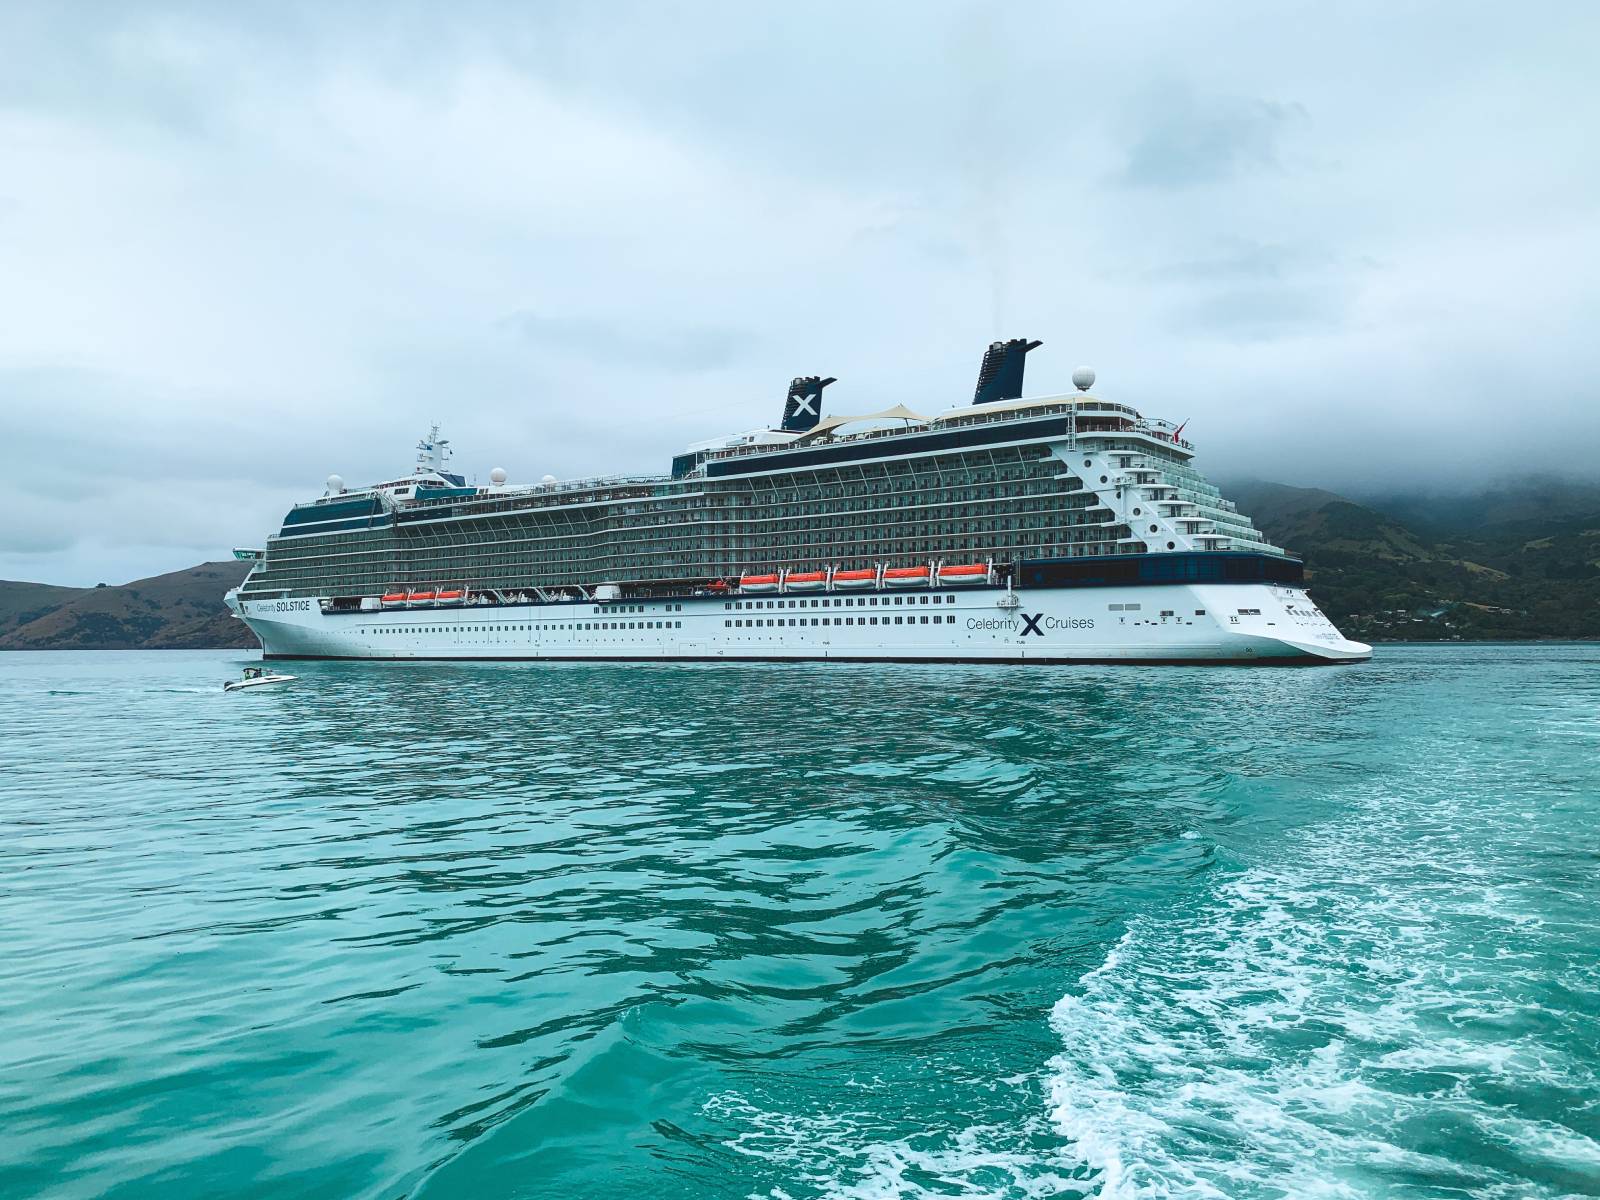 celebrity solstice cruise ship in the ocean with views of all the decks and balconies